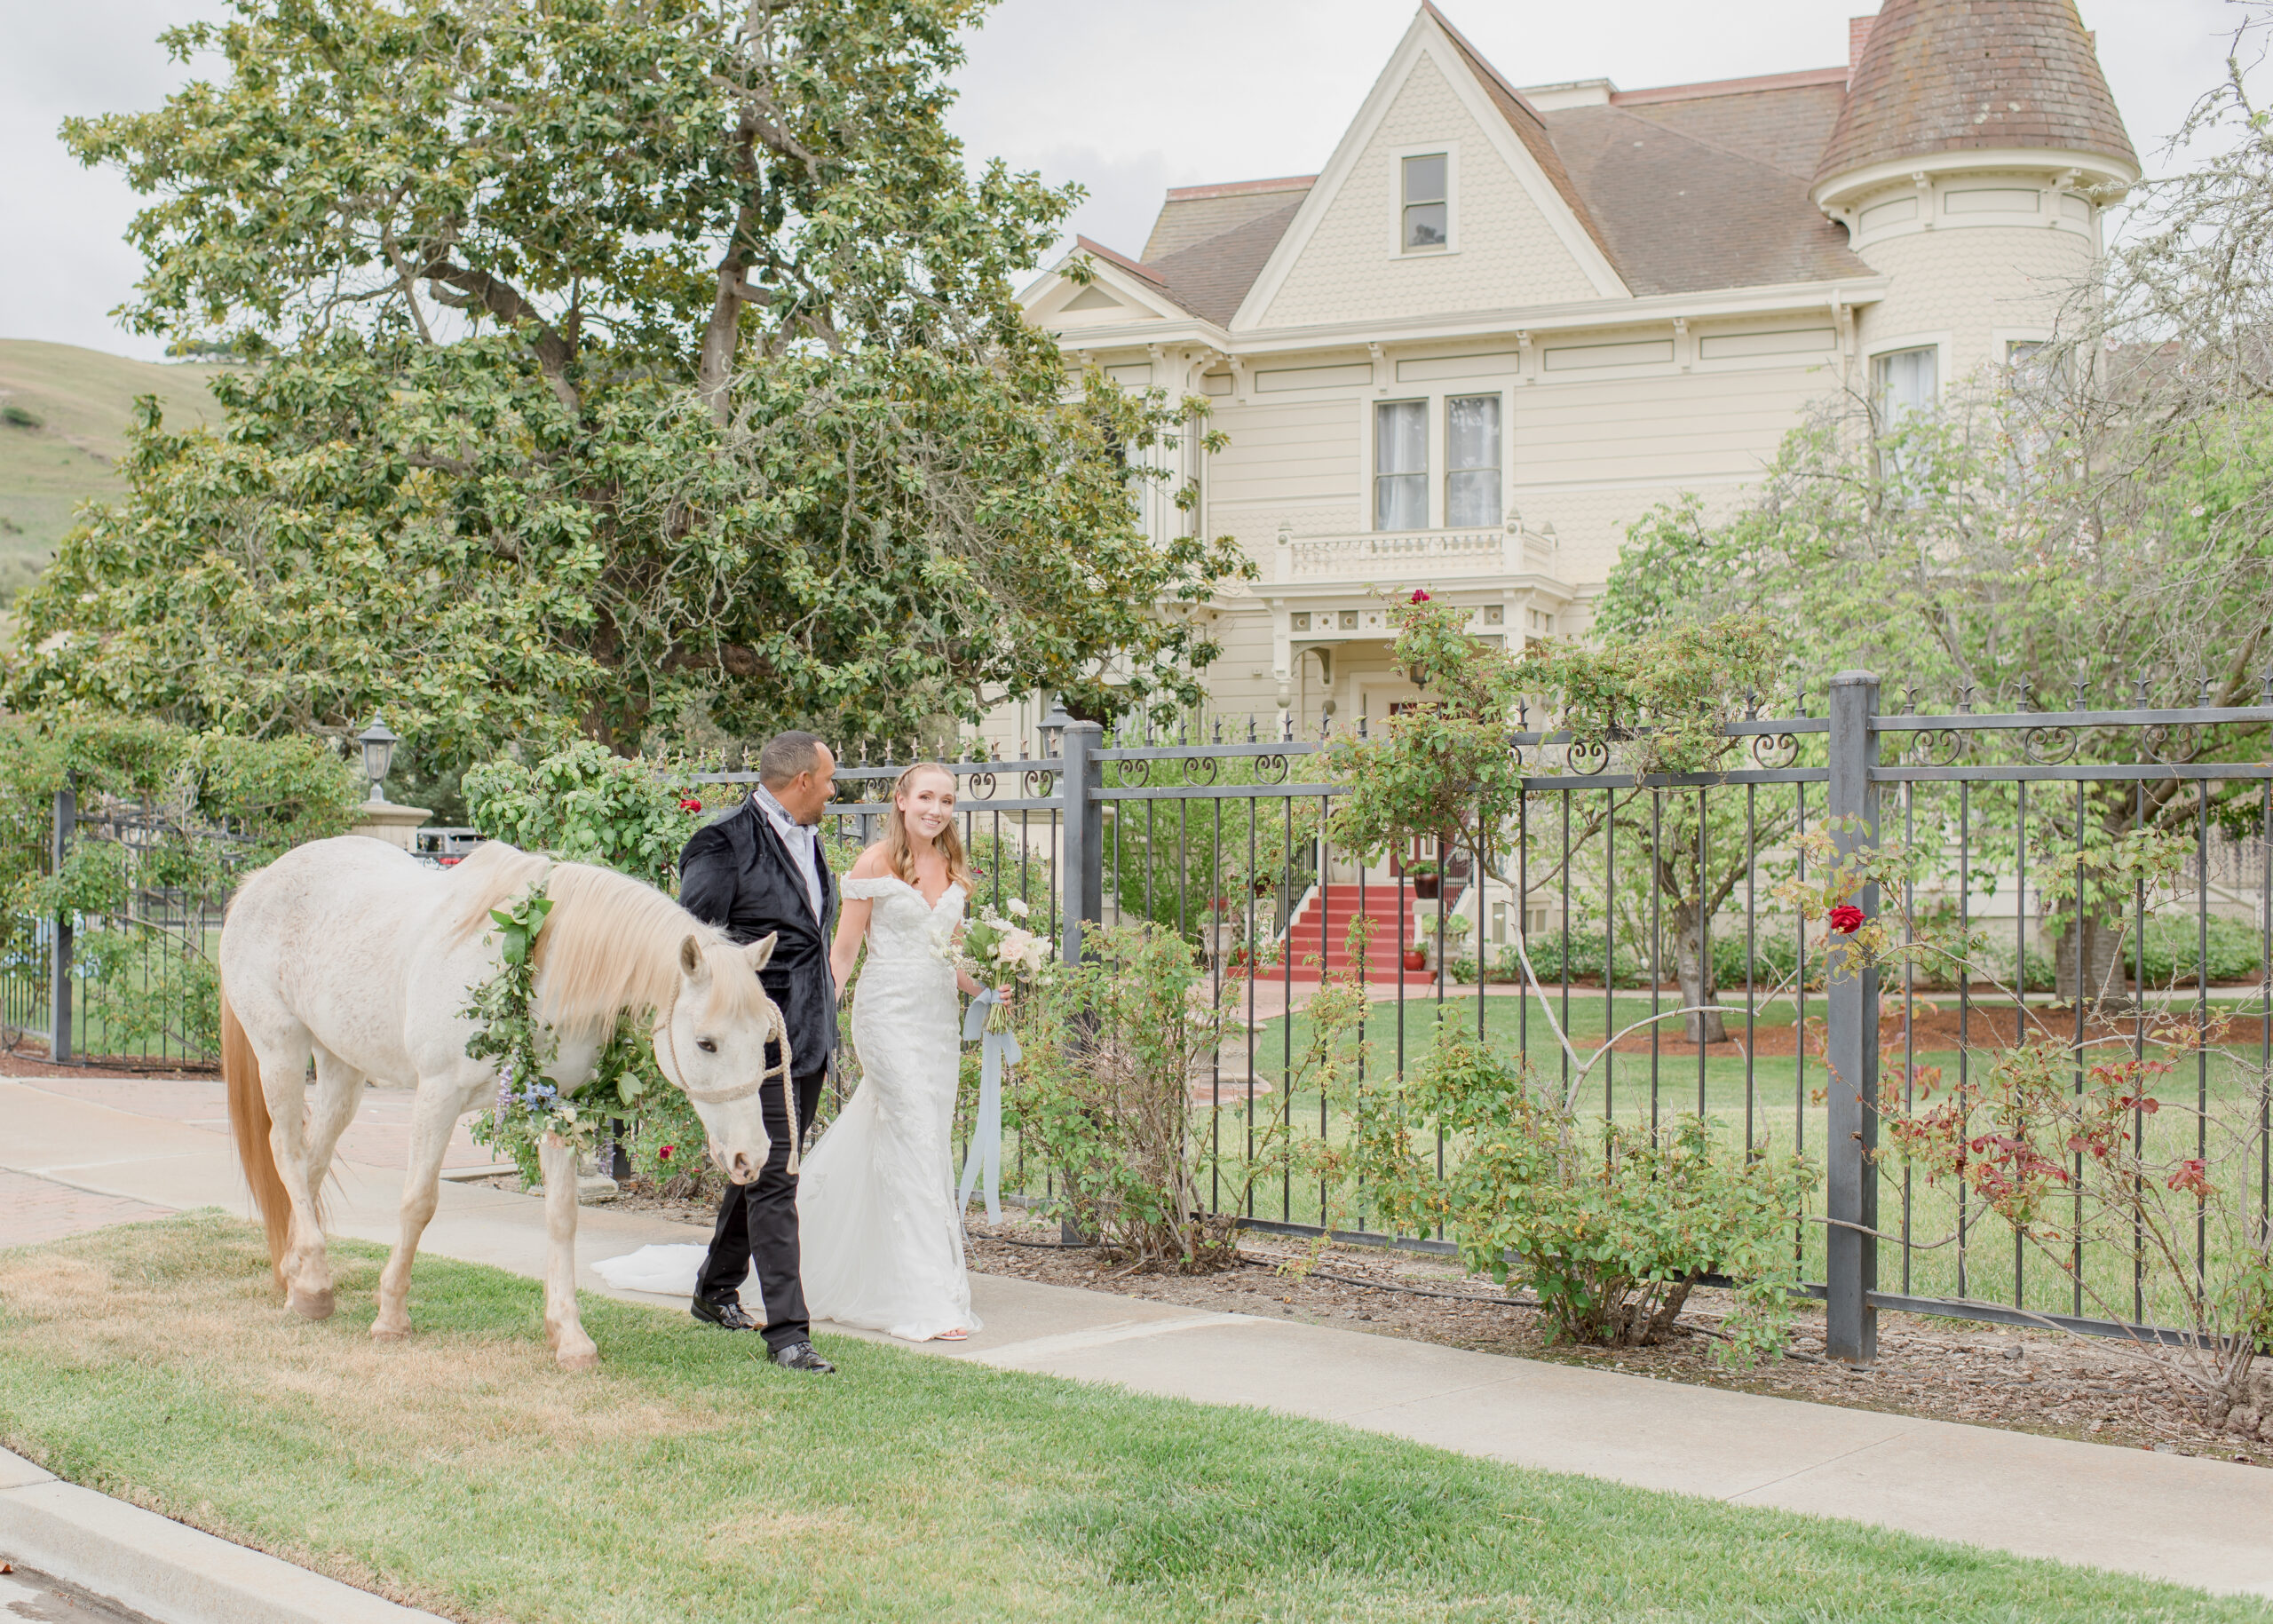 groom and bride walking in front of chateau with white horse